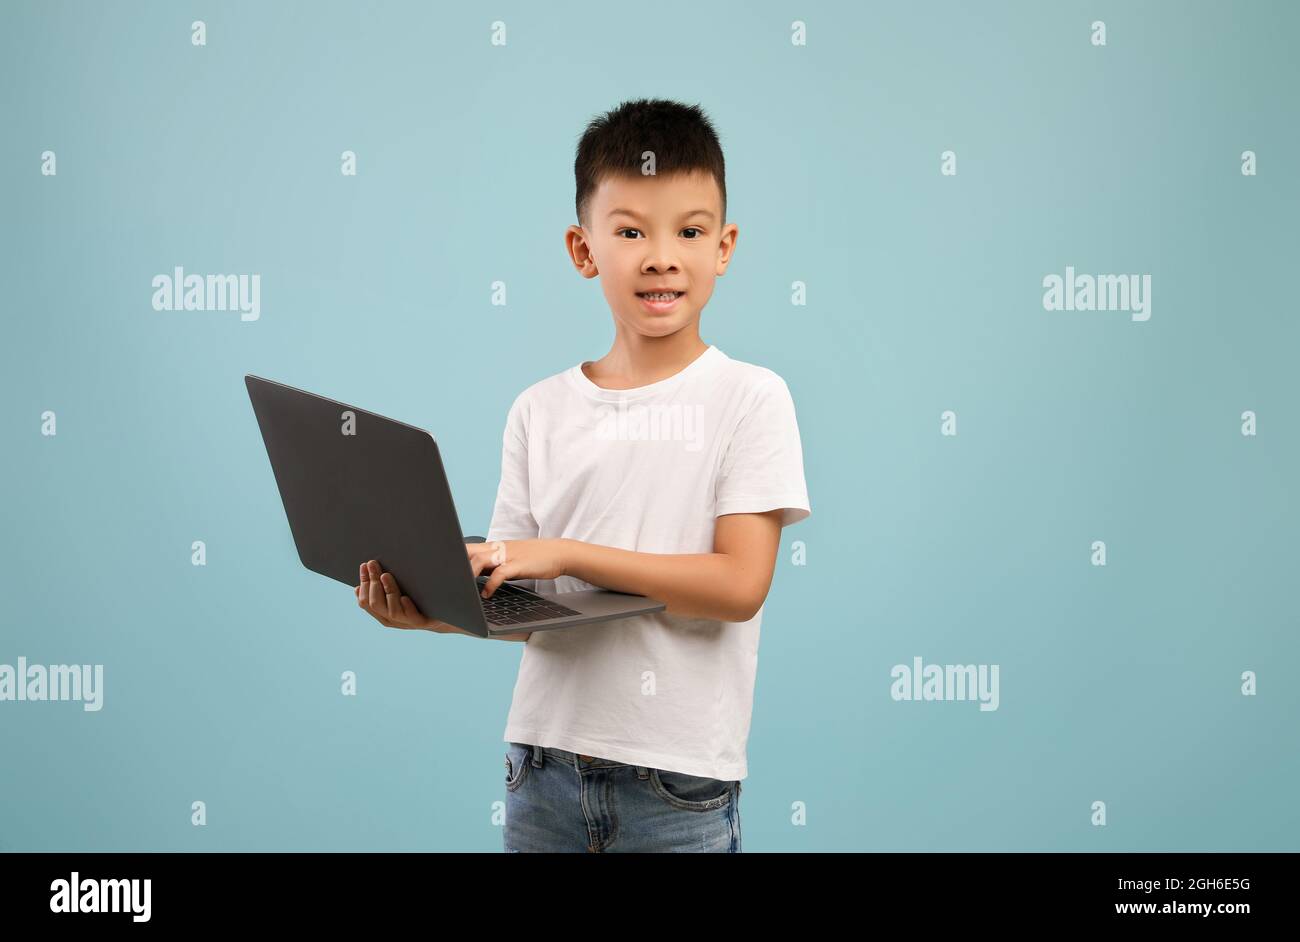 Online Education Concept. Little Asian Boy With Laptop Posing Over Blue Background Stock Photo